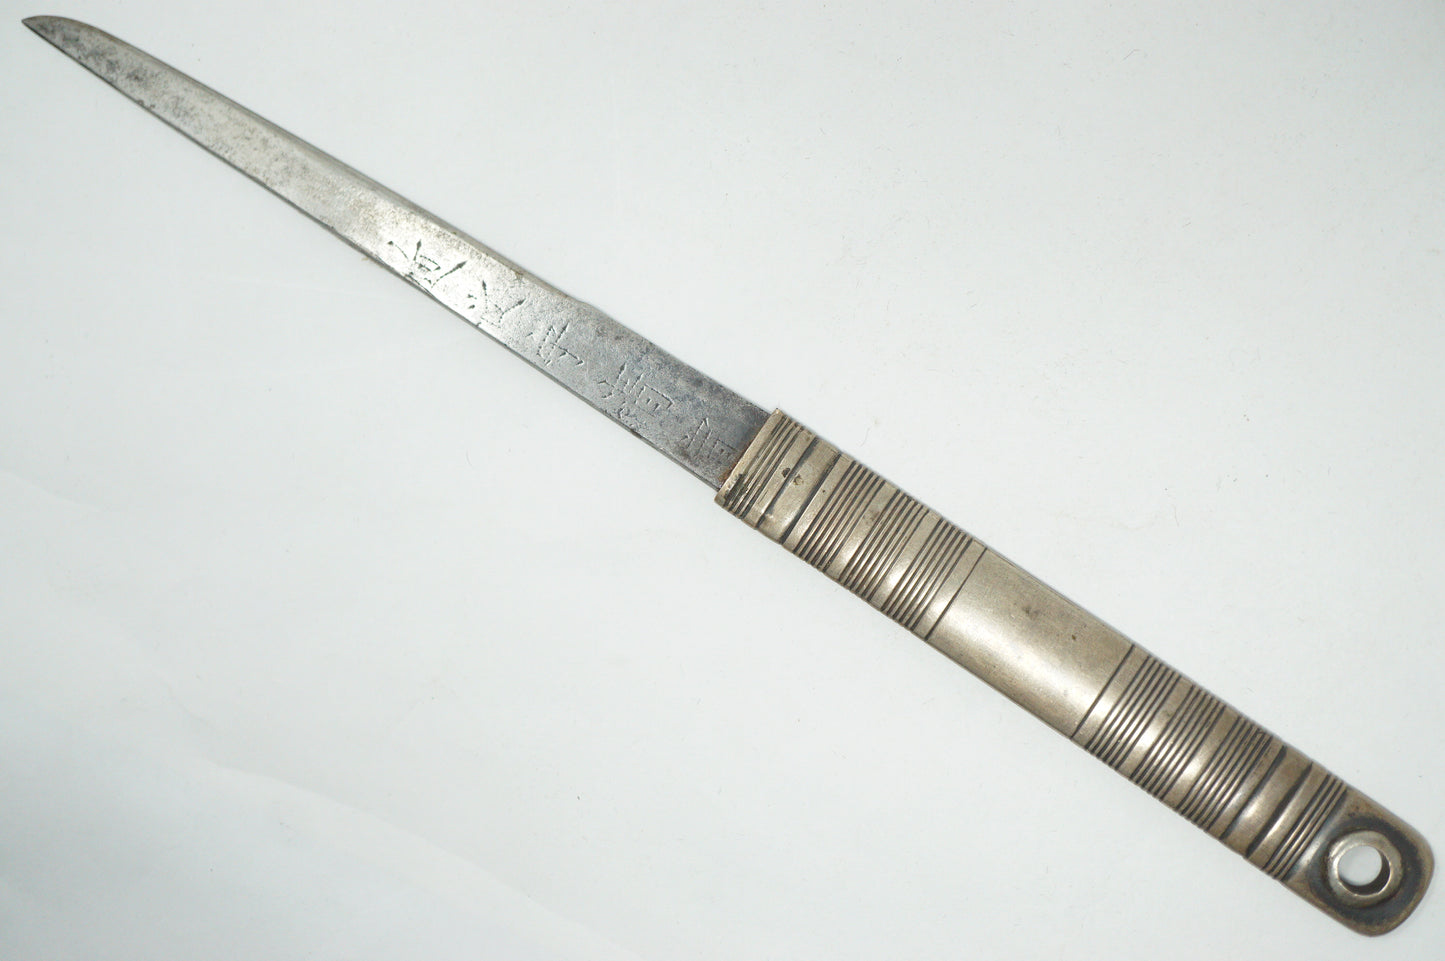 Japanese Kozuka Knife Original Antique Sword Accessory with signed Blade from Japan 1214D11